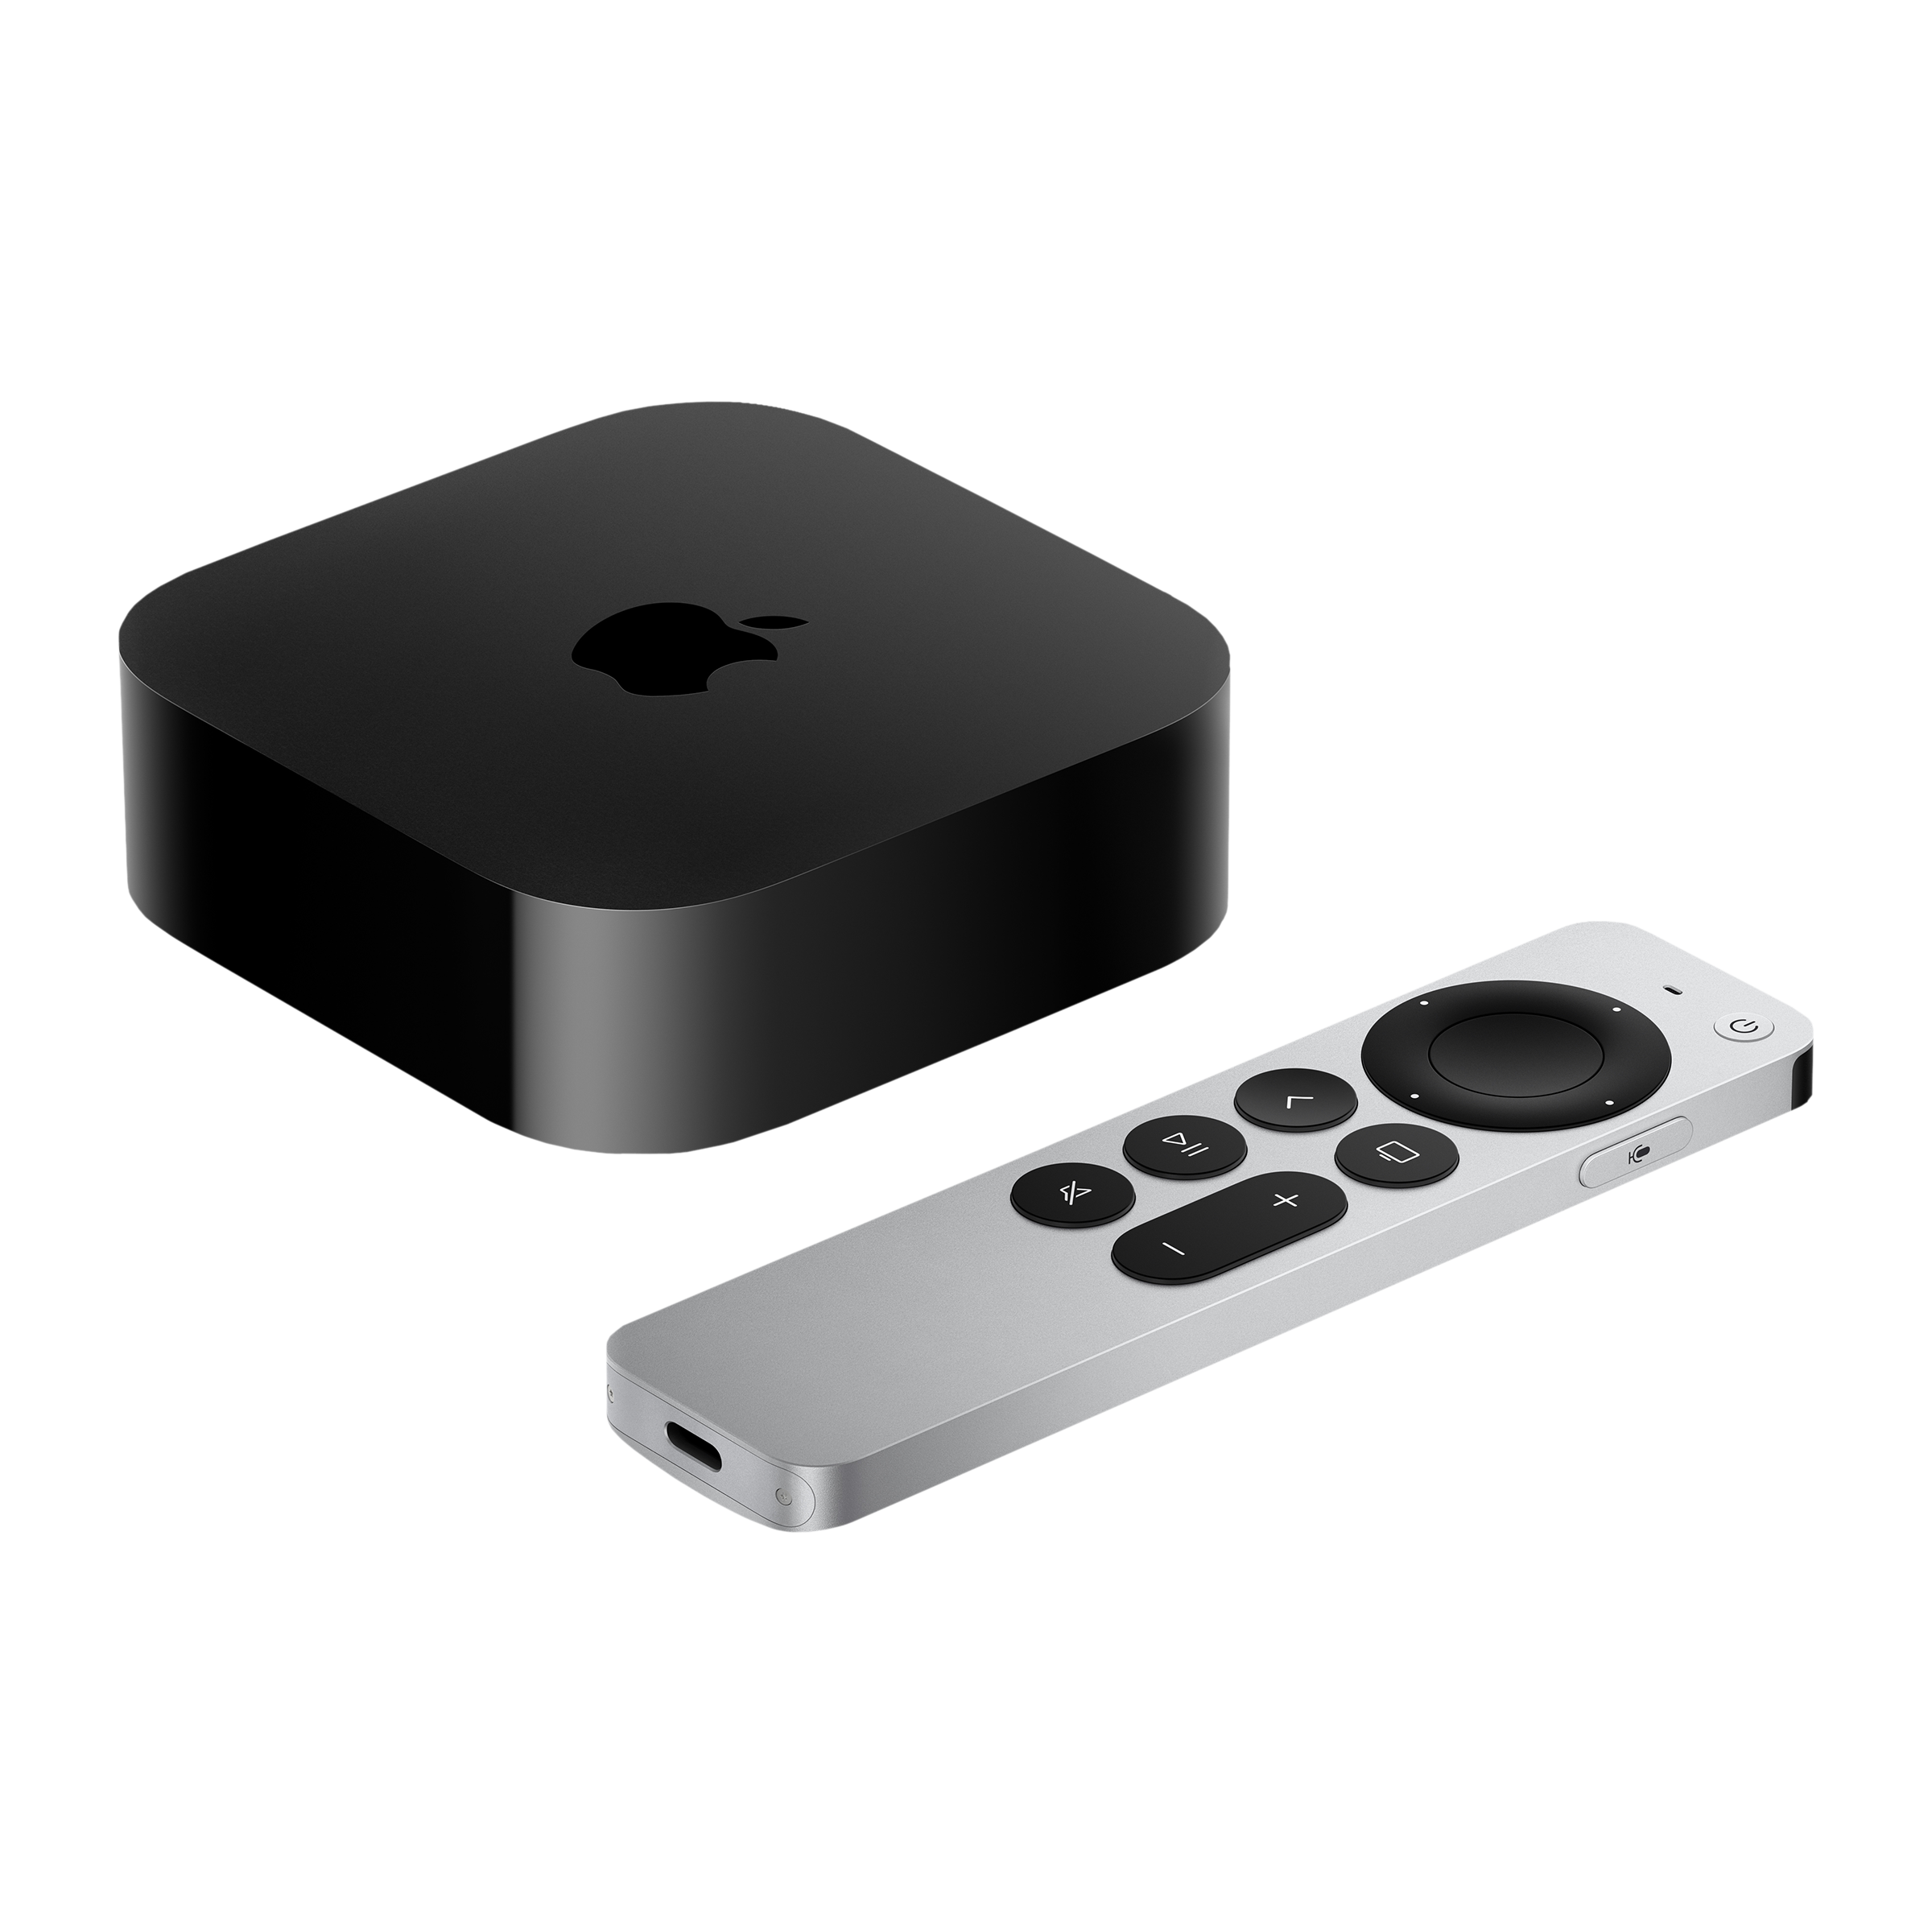 Buy Apple TV 4K with Siri Remote (Wi-Fi Supported, MN873HN/A, Black) Online – Croma